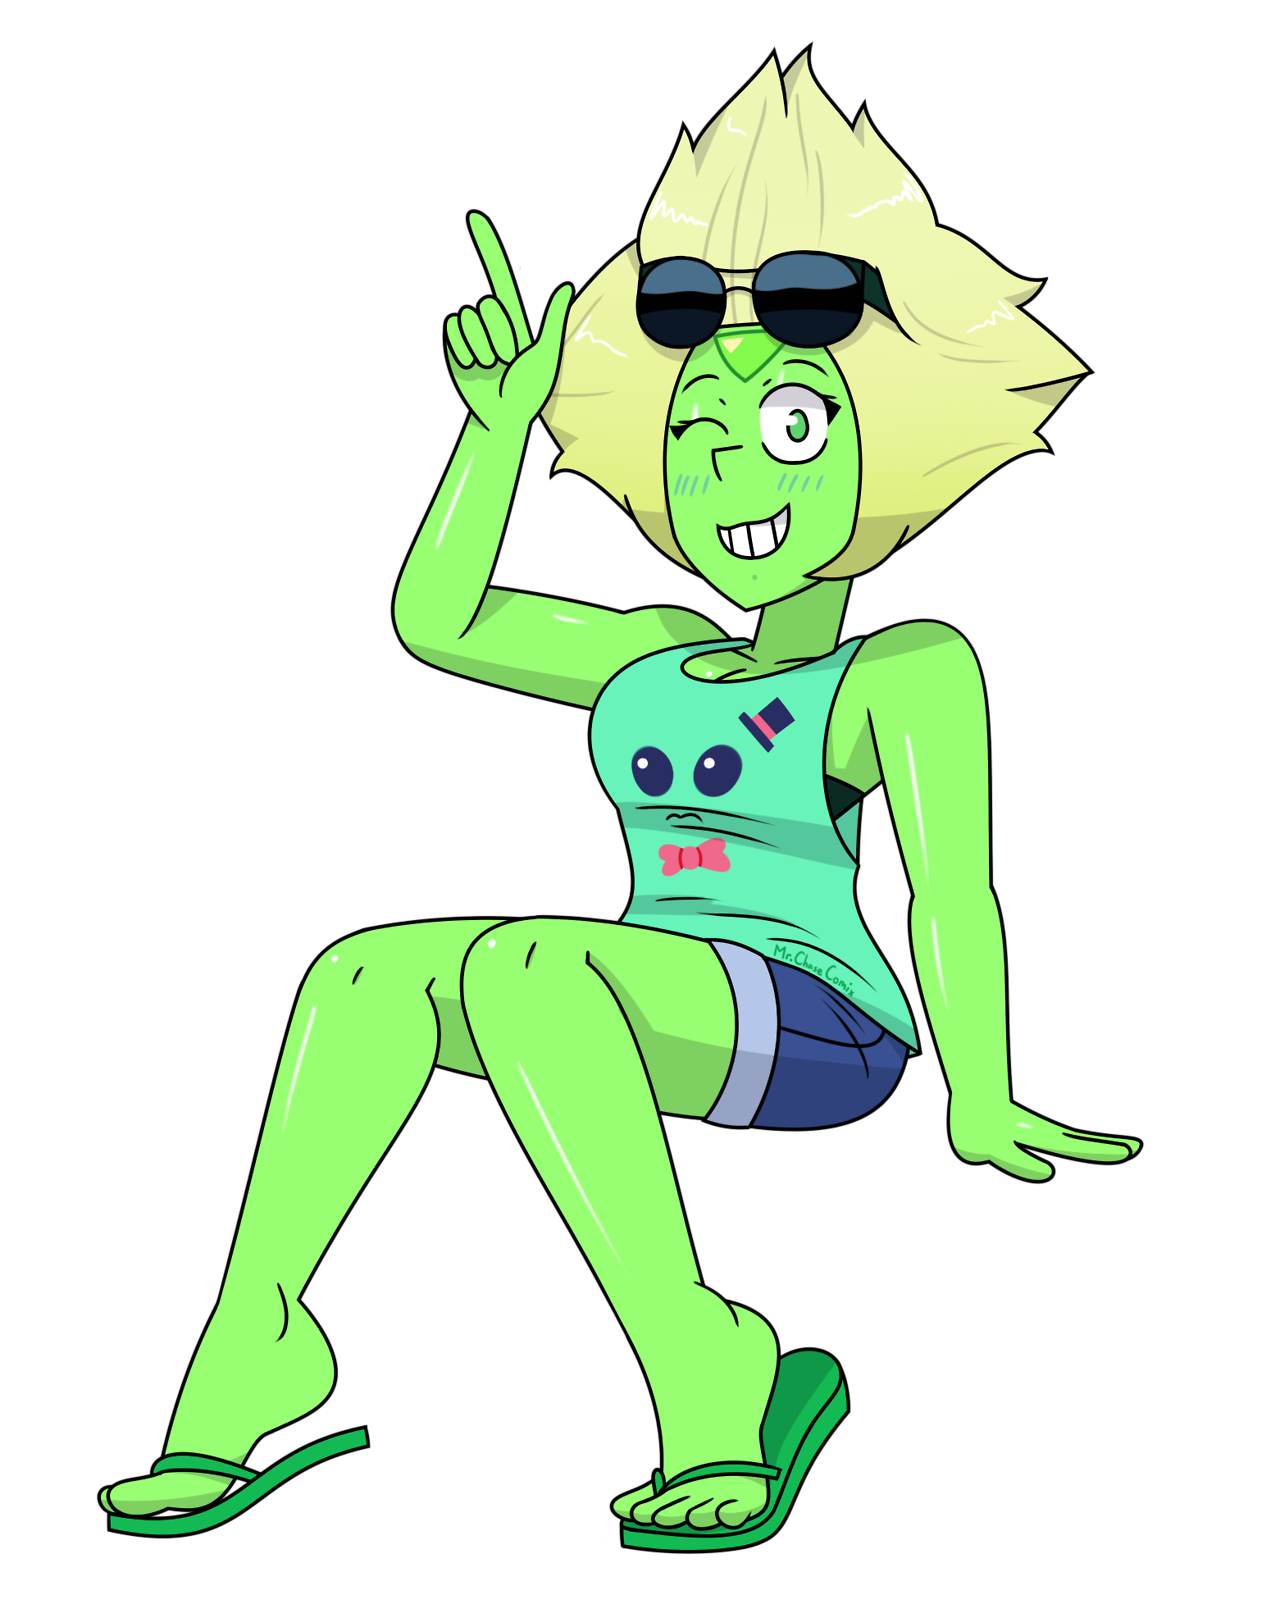 Summer Peri I wanted to do a little Peridot doodle for the fun of it.